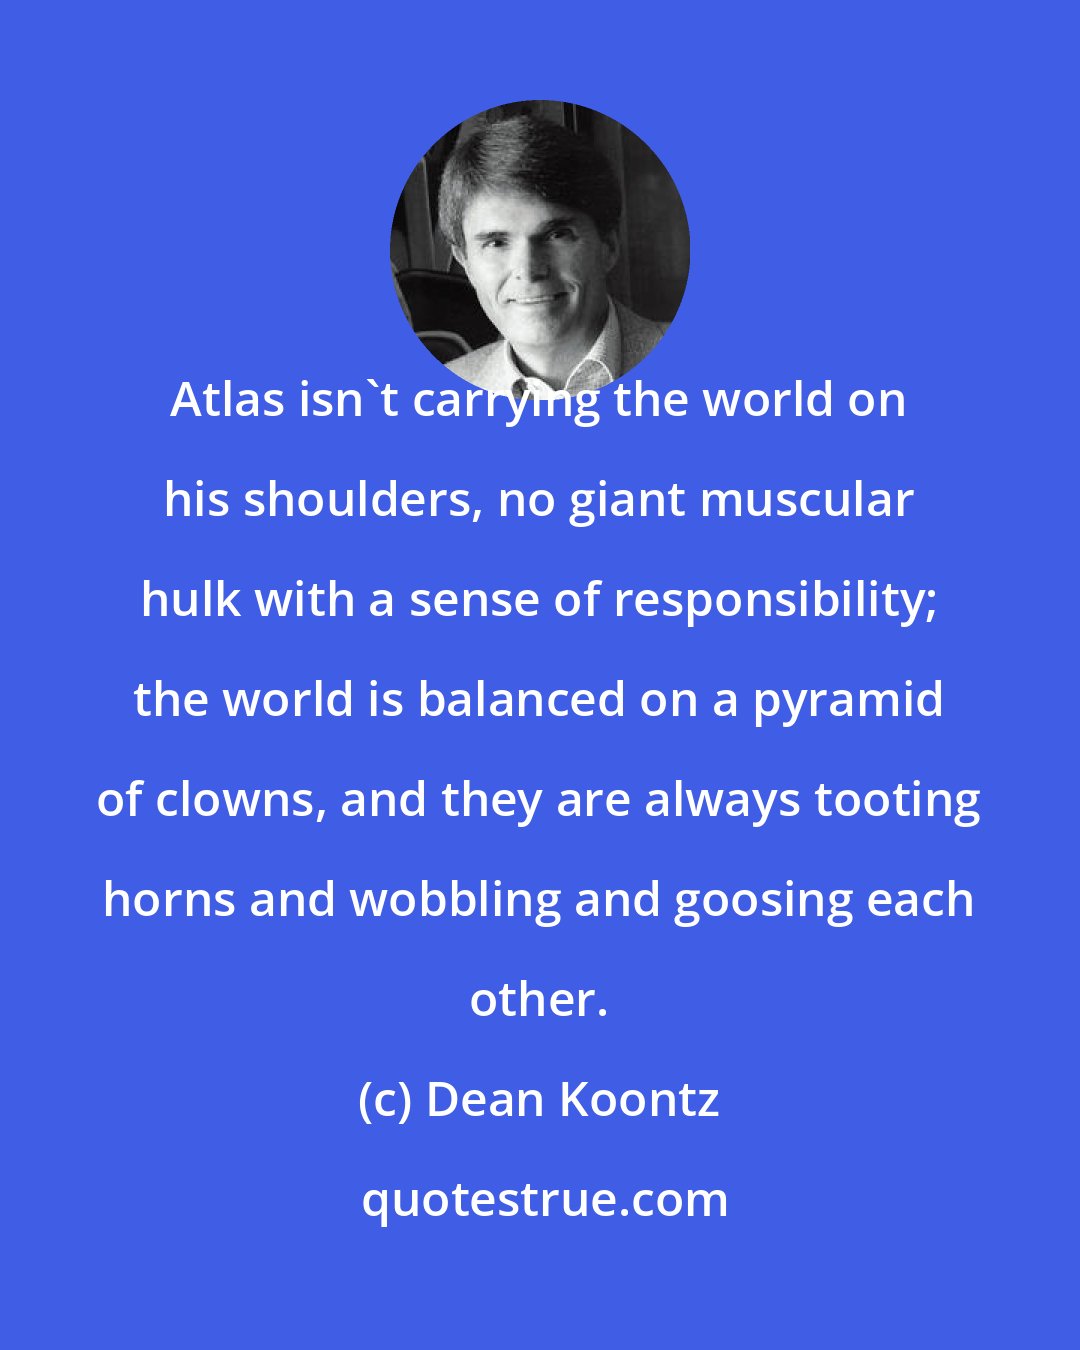 Dean Koontz: Atlas isn't carrying the world on his shoulders, no giant muscular hulk with a sense of responsibility; the world is balanced on a pyramid of clowns, and they are always tooting horns and wobbling and goosing each other.